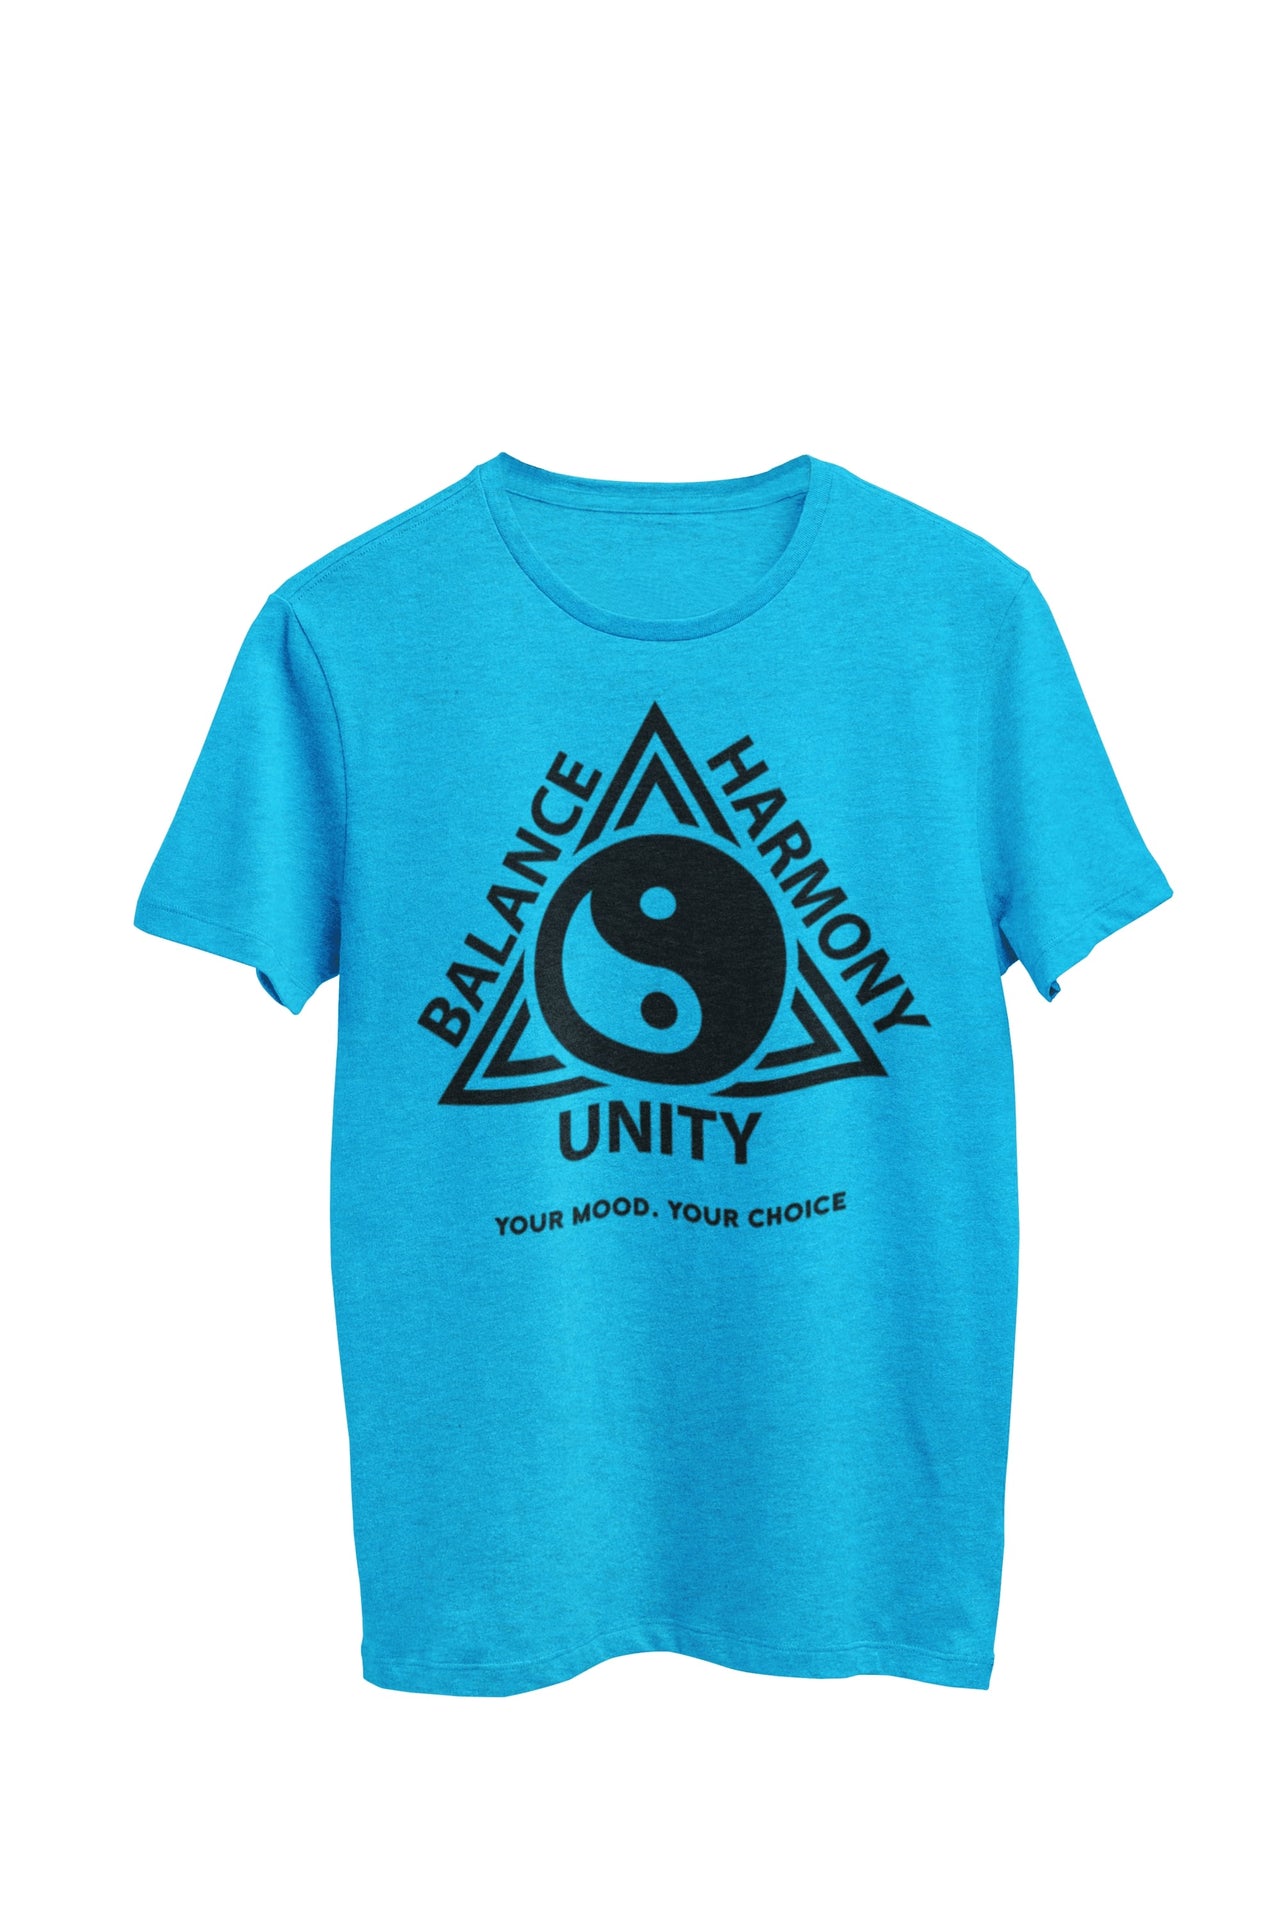 Light blue heather unisex t-shirt featuring the text 'Balance, Harmony, and Unity' written around a triangle outside a Yin Yang symbol. Designed by WooHoo Apparel.